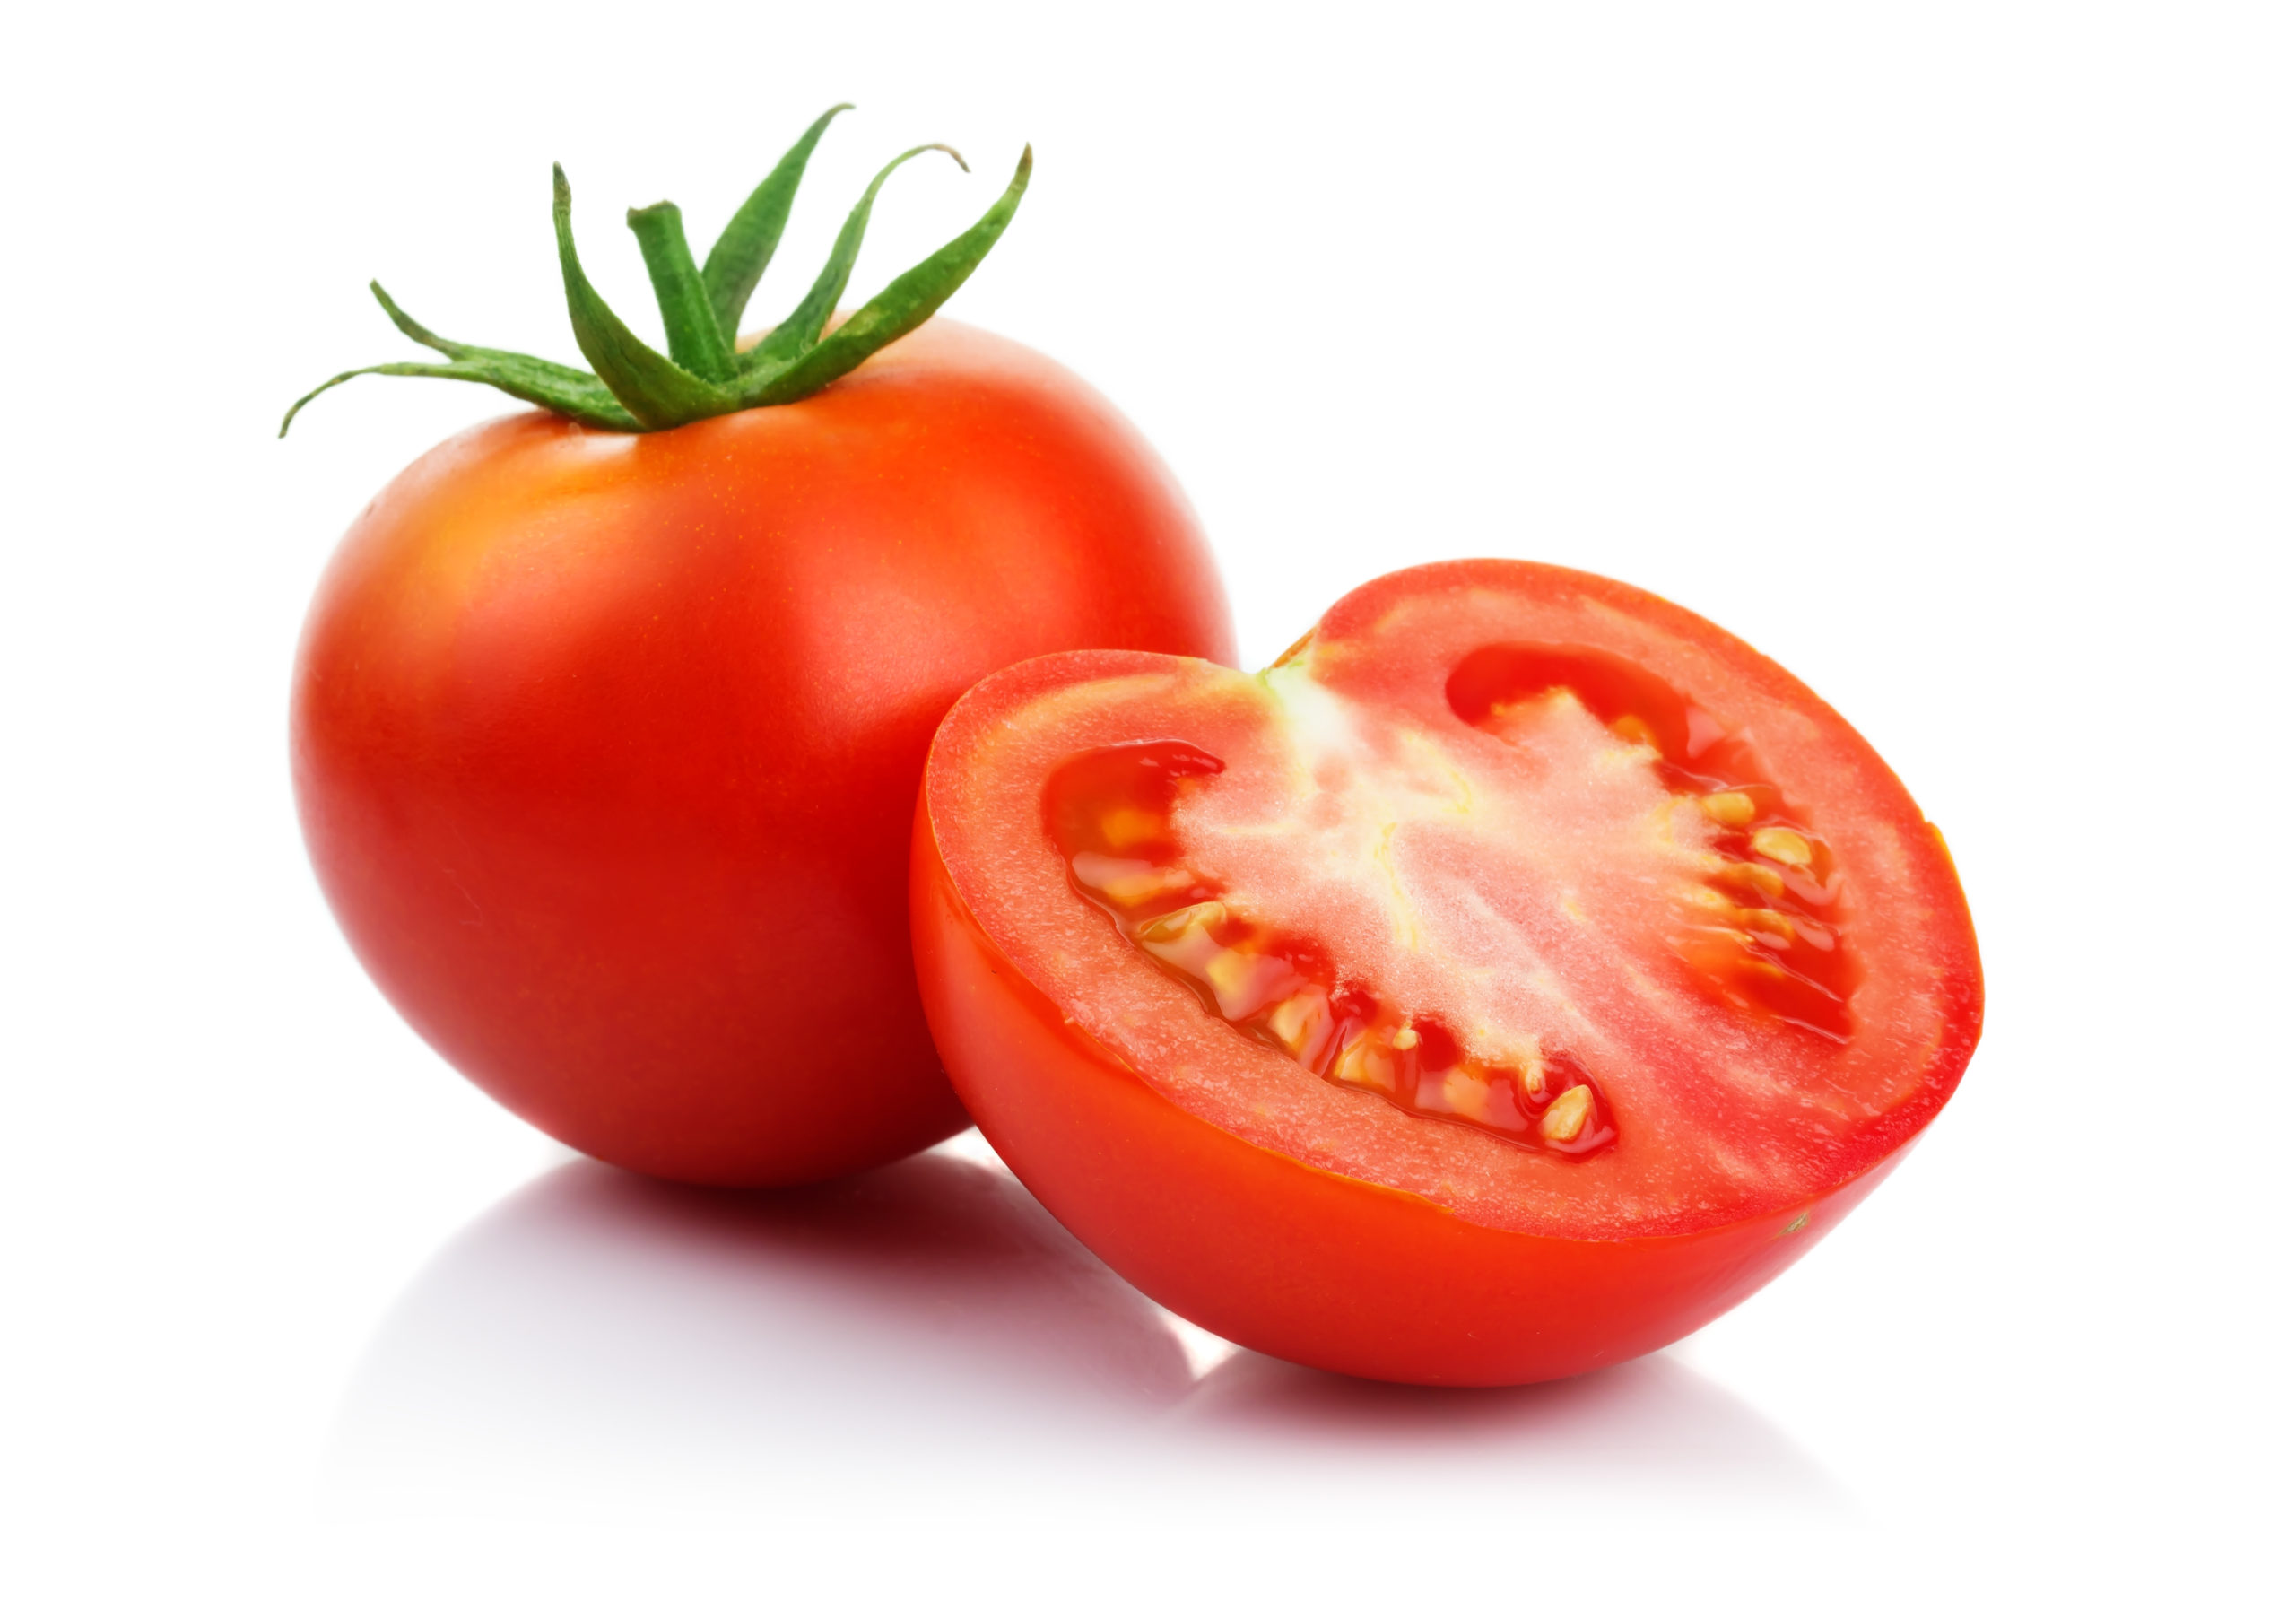 Red tomatoes with cut isolated on white background